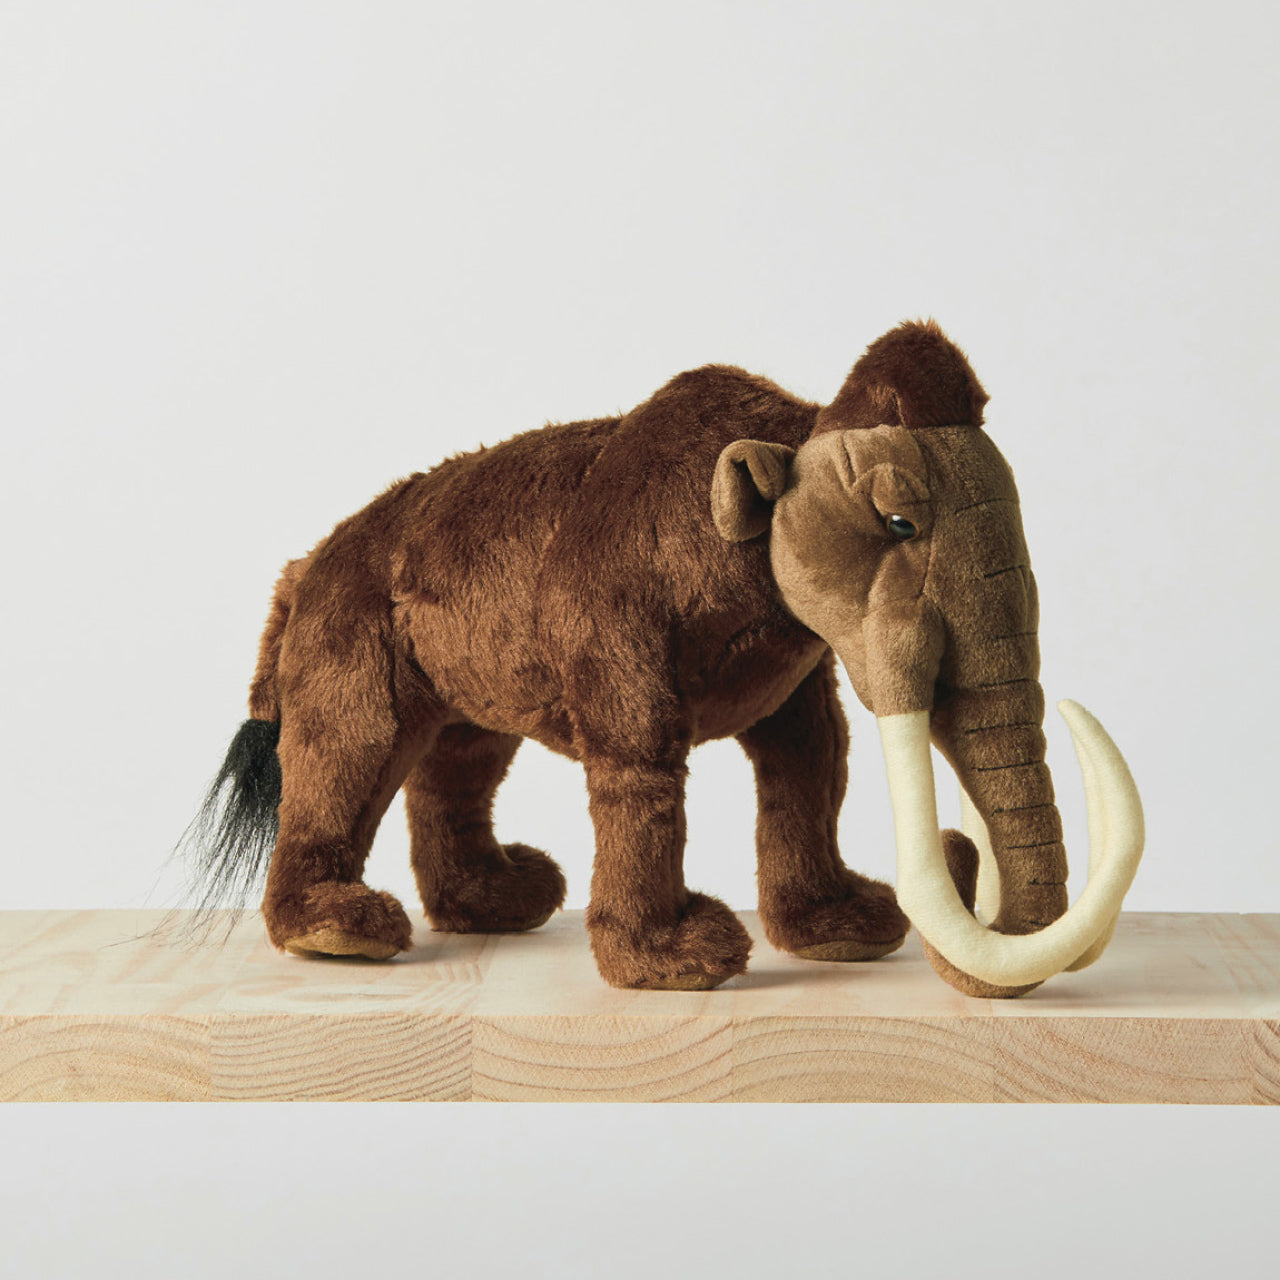 Mammoth Soft Toy standing on ledge